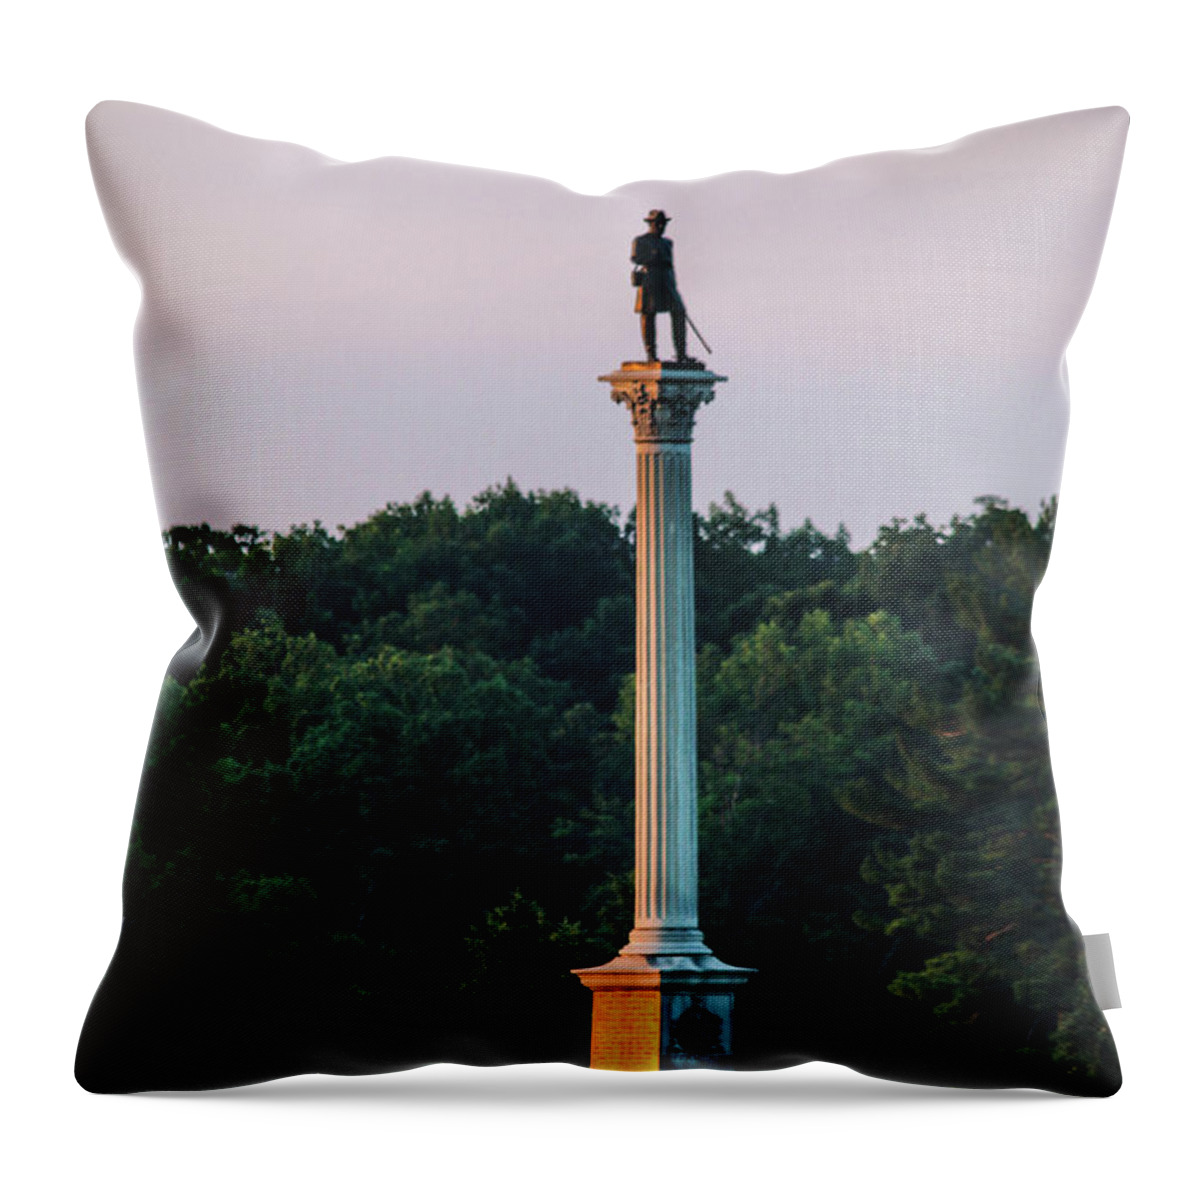 This Is A Photo Of The Vermont Monument Throw Pillow featuring the photograph Vermont Monument by Bill Rogers